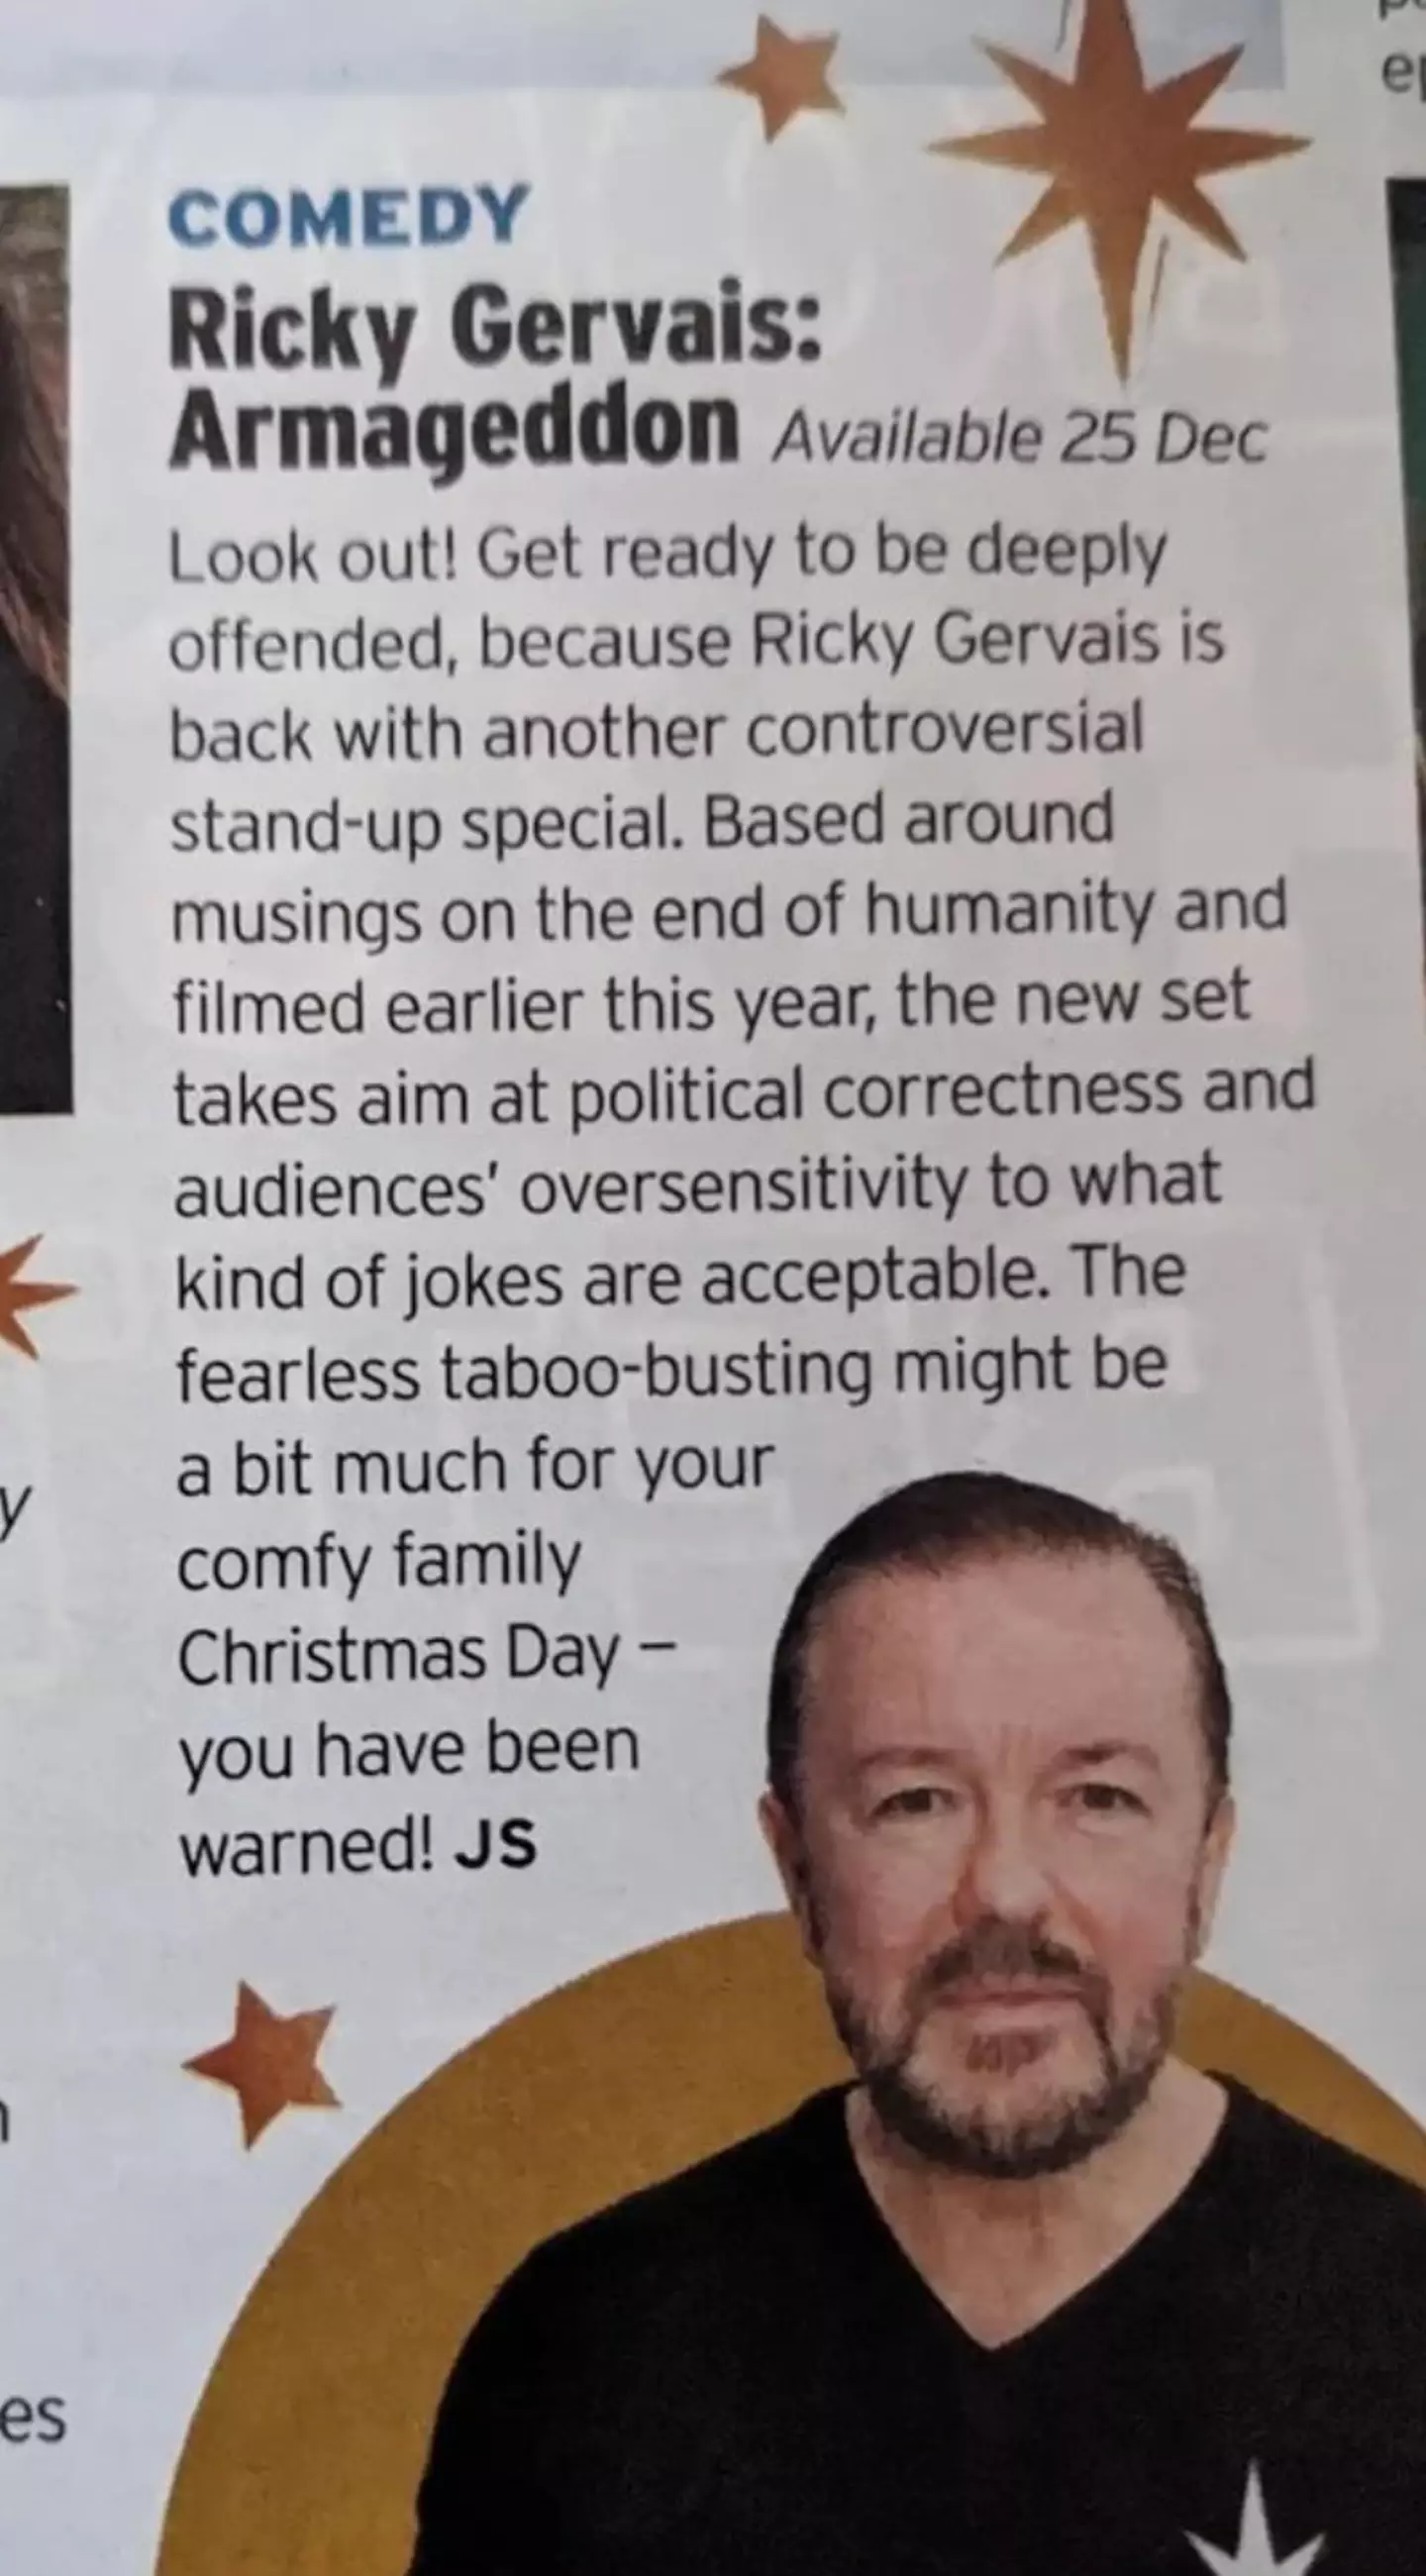 The TV magazine's listing of Gervais' show was missing certain words.